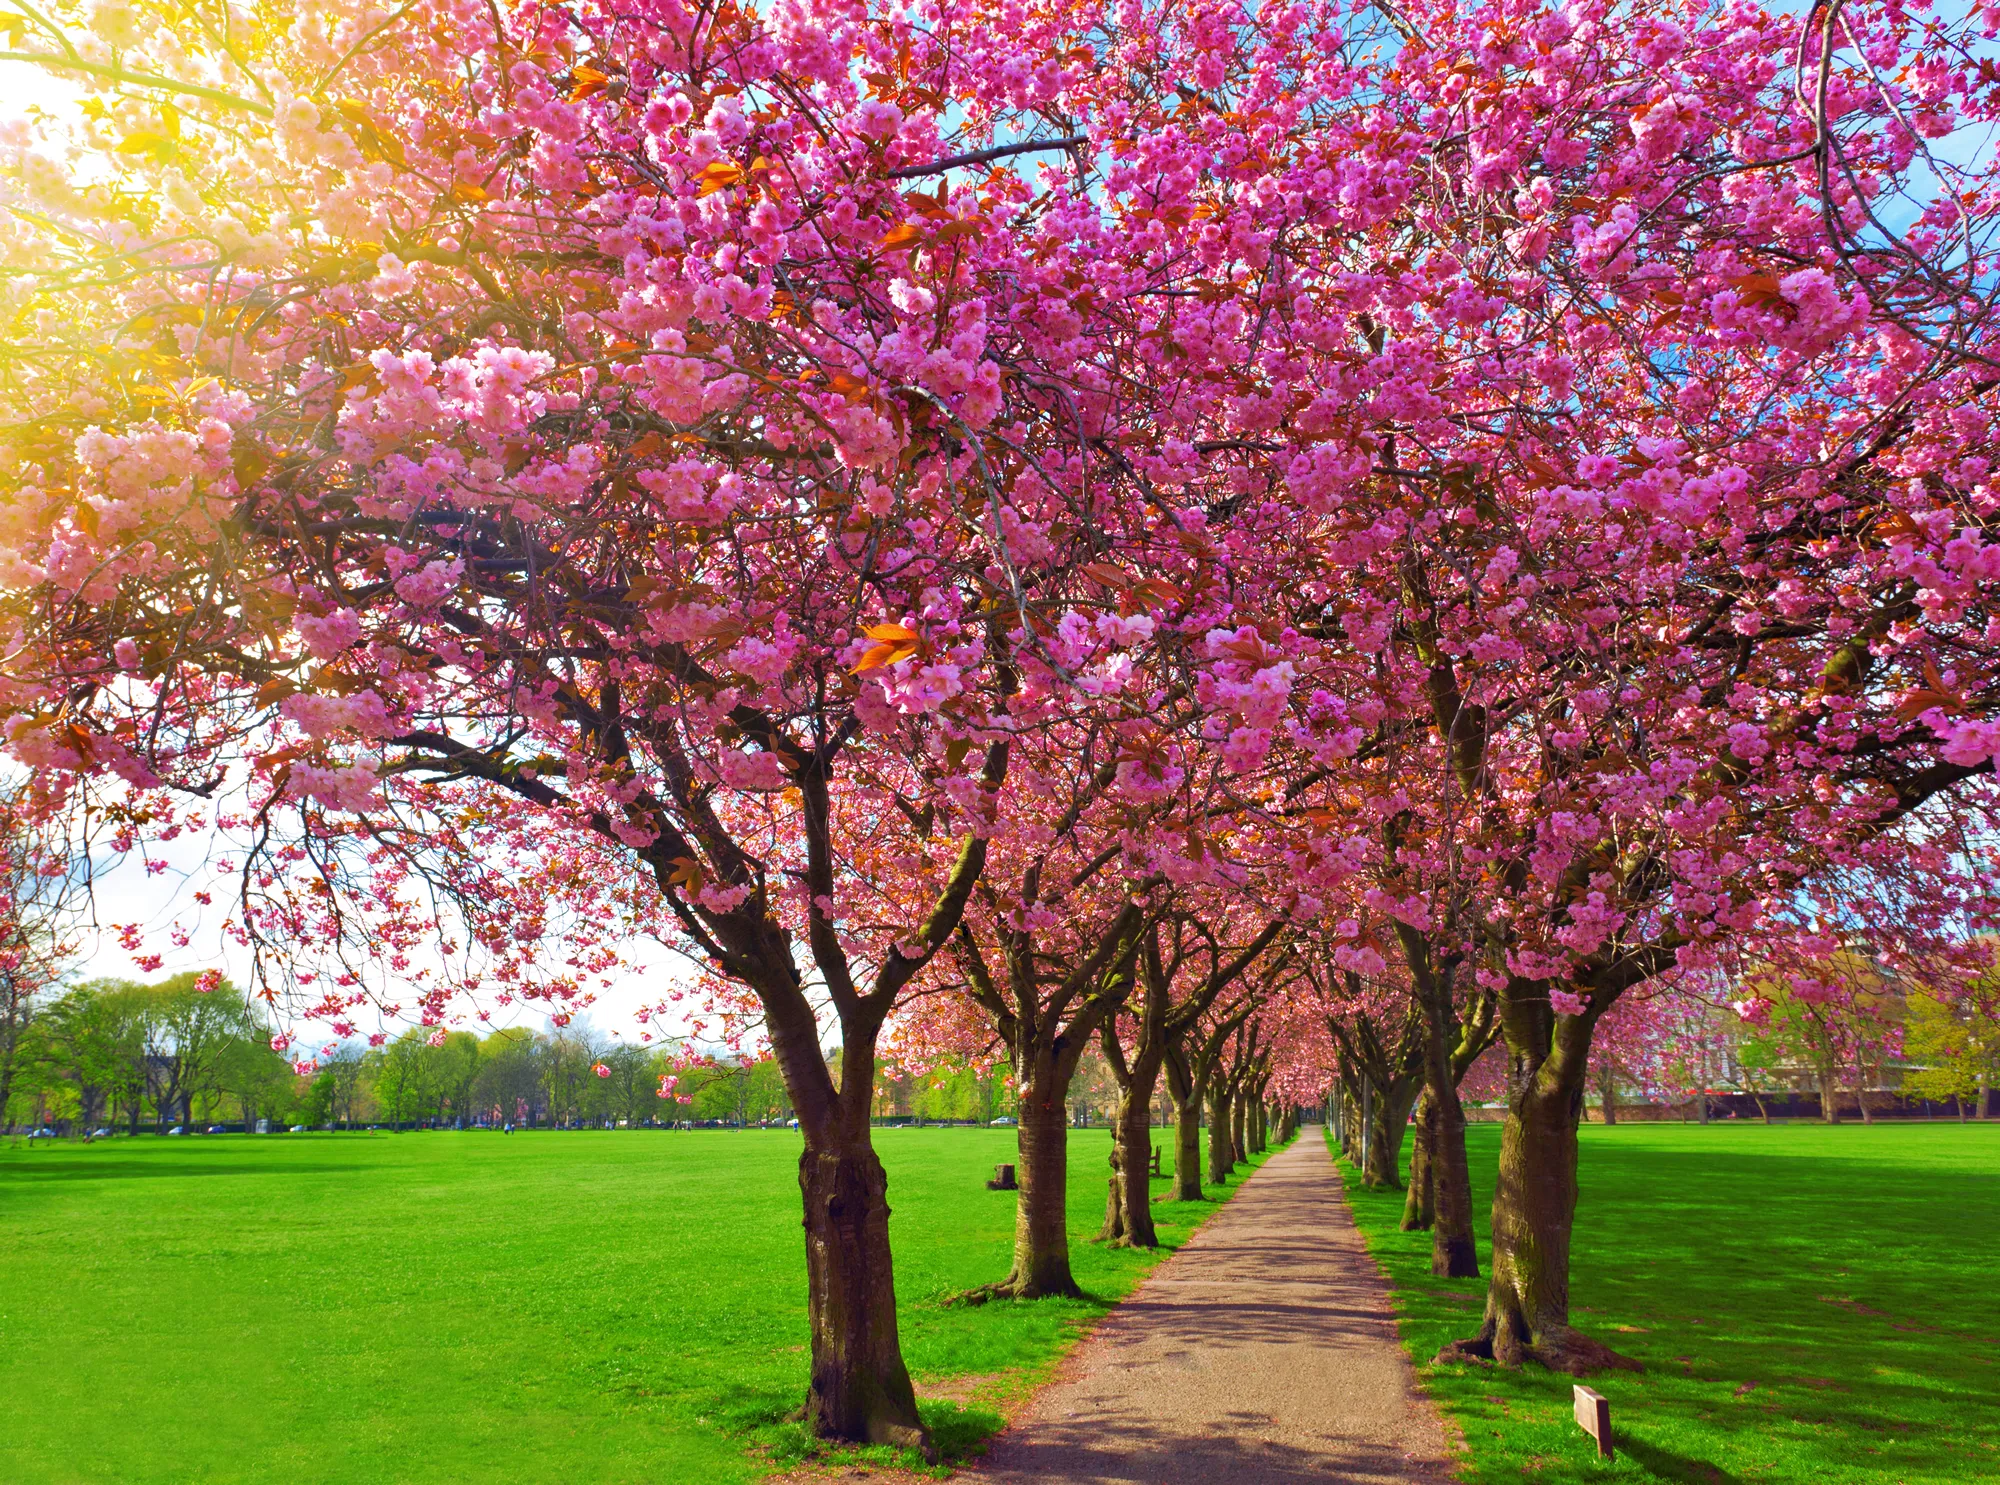 Walk path surrounded with blossoming plum trees at Meadows park, Edinburgh. Colorful spring landscape